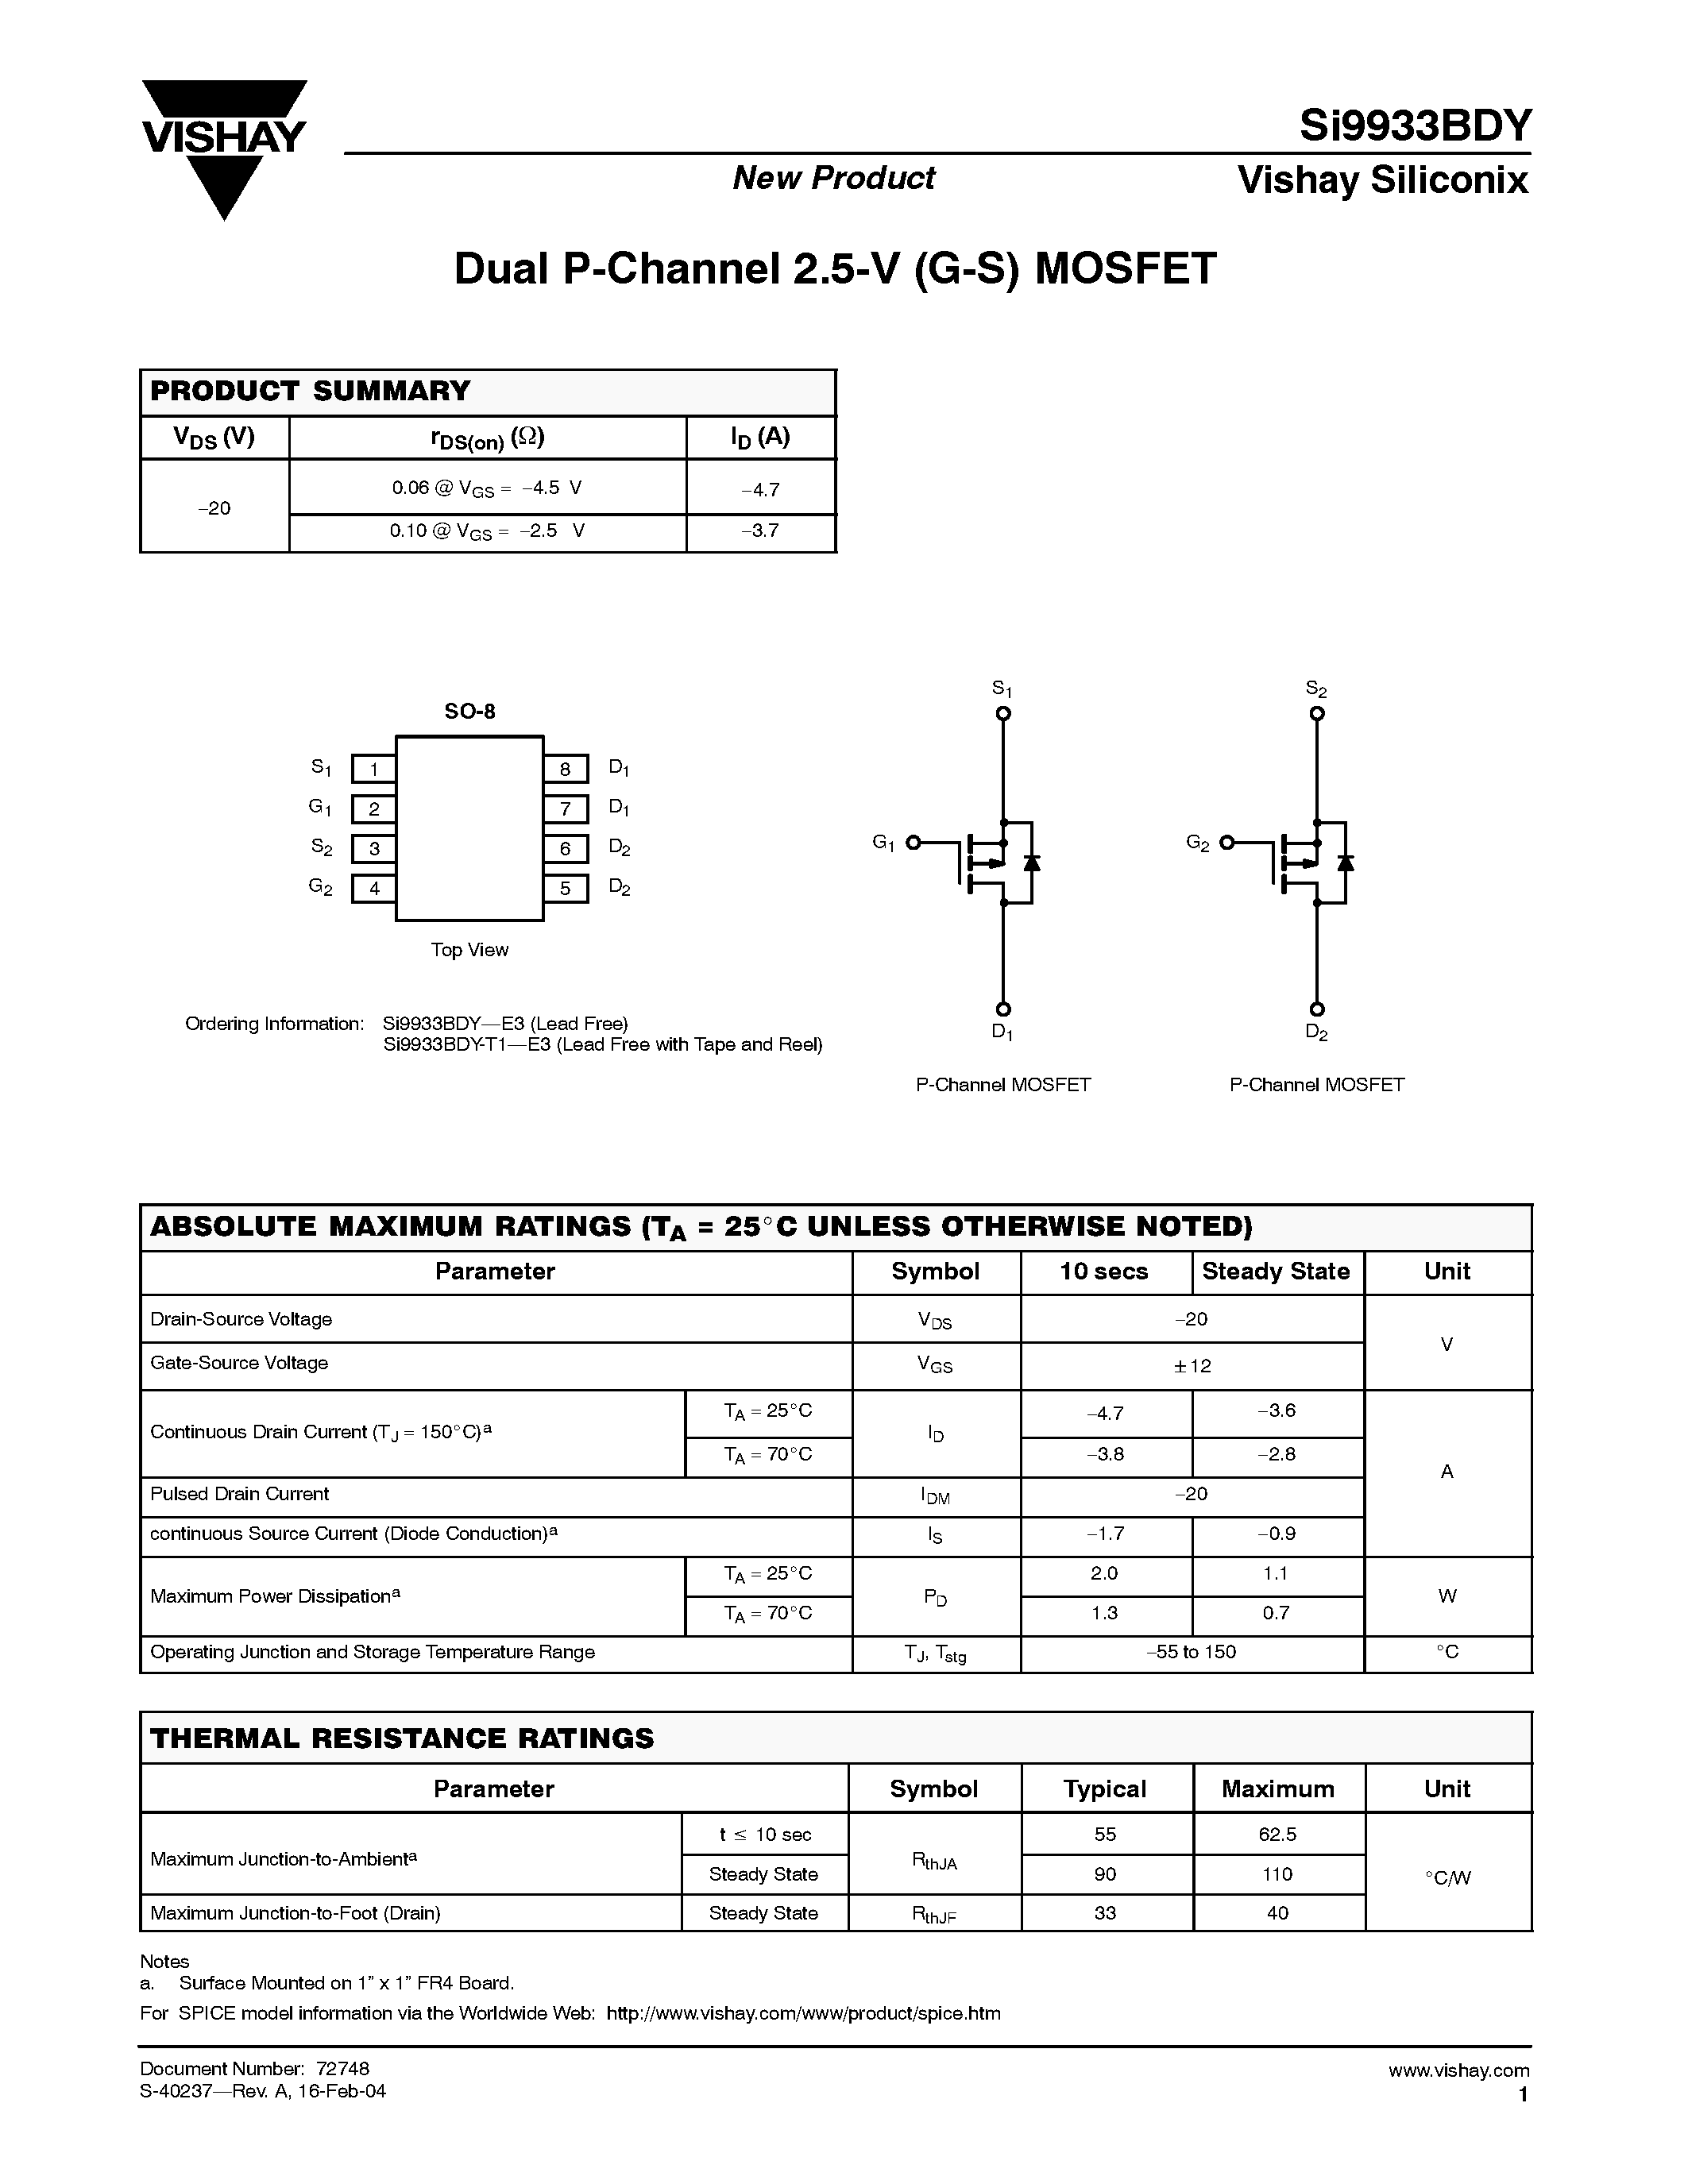 Даташит SI9933BDY-E3 - Dual P-Channel 2.5-V (G-S) MOSFET страница 1